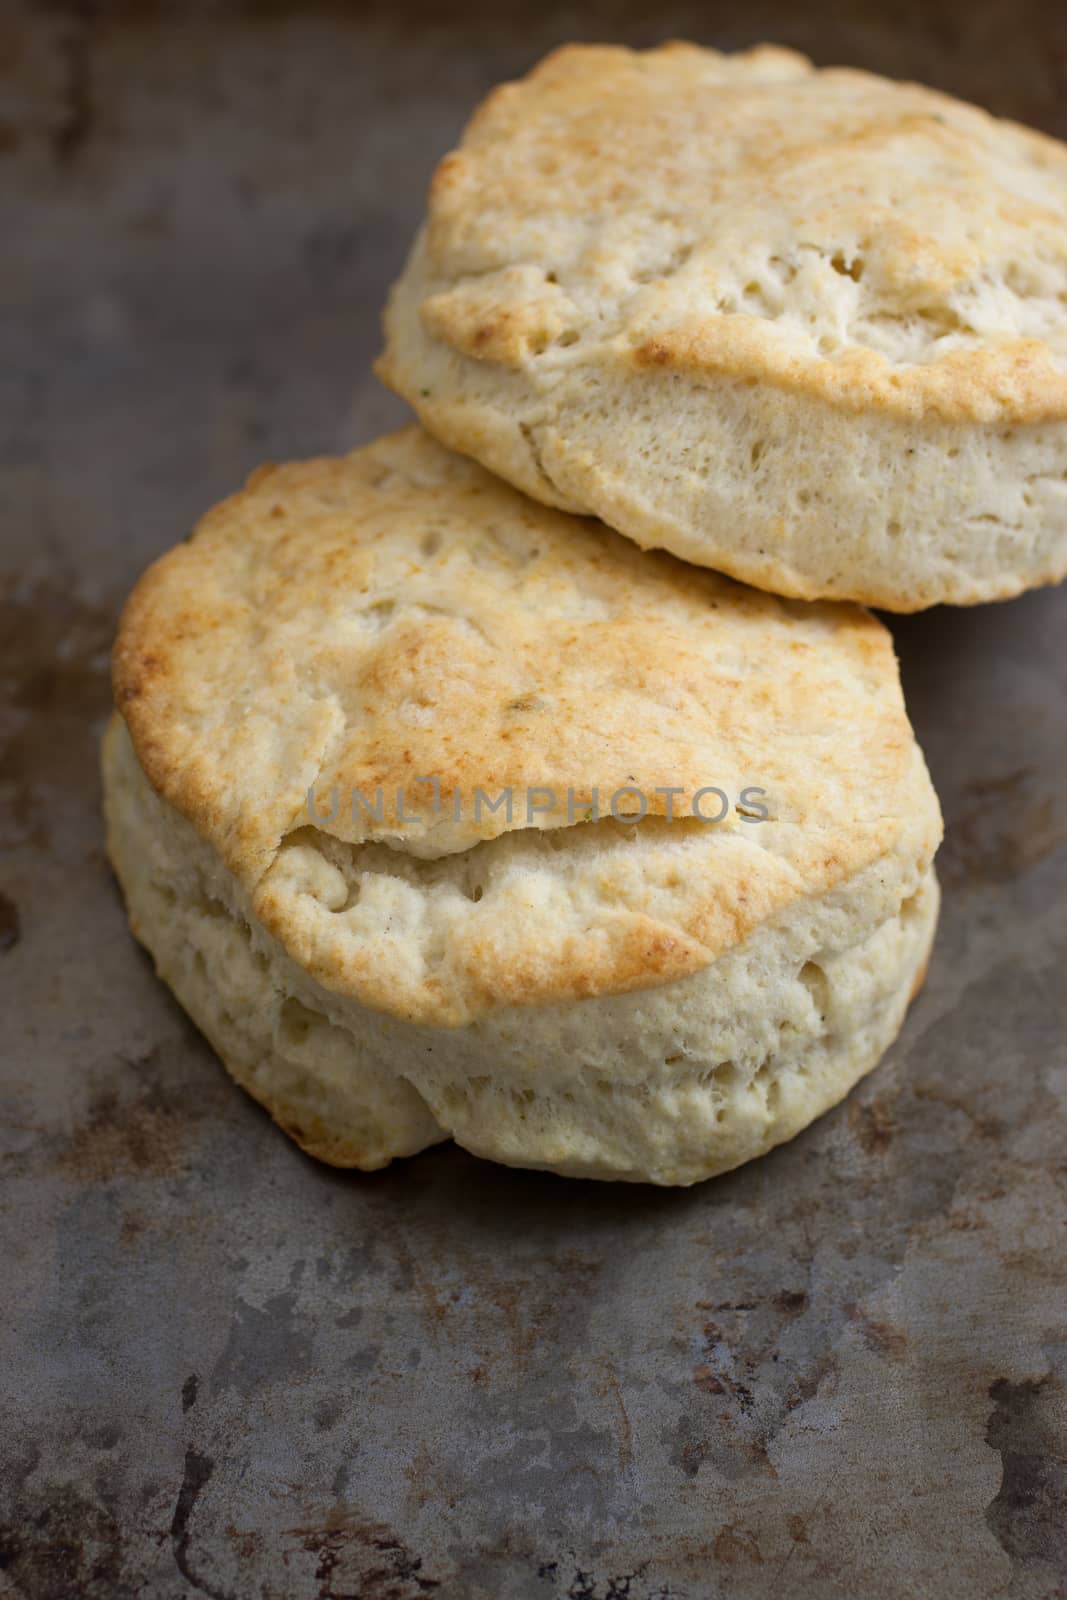 Homemade Biscuits by SouthernLightStudios